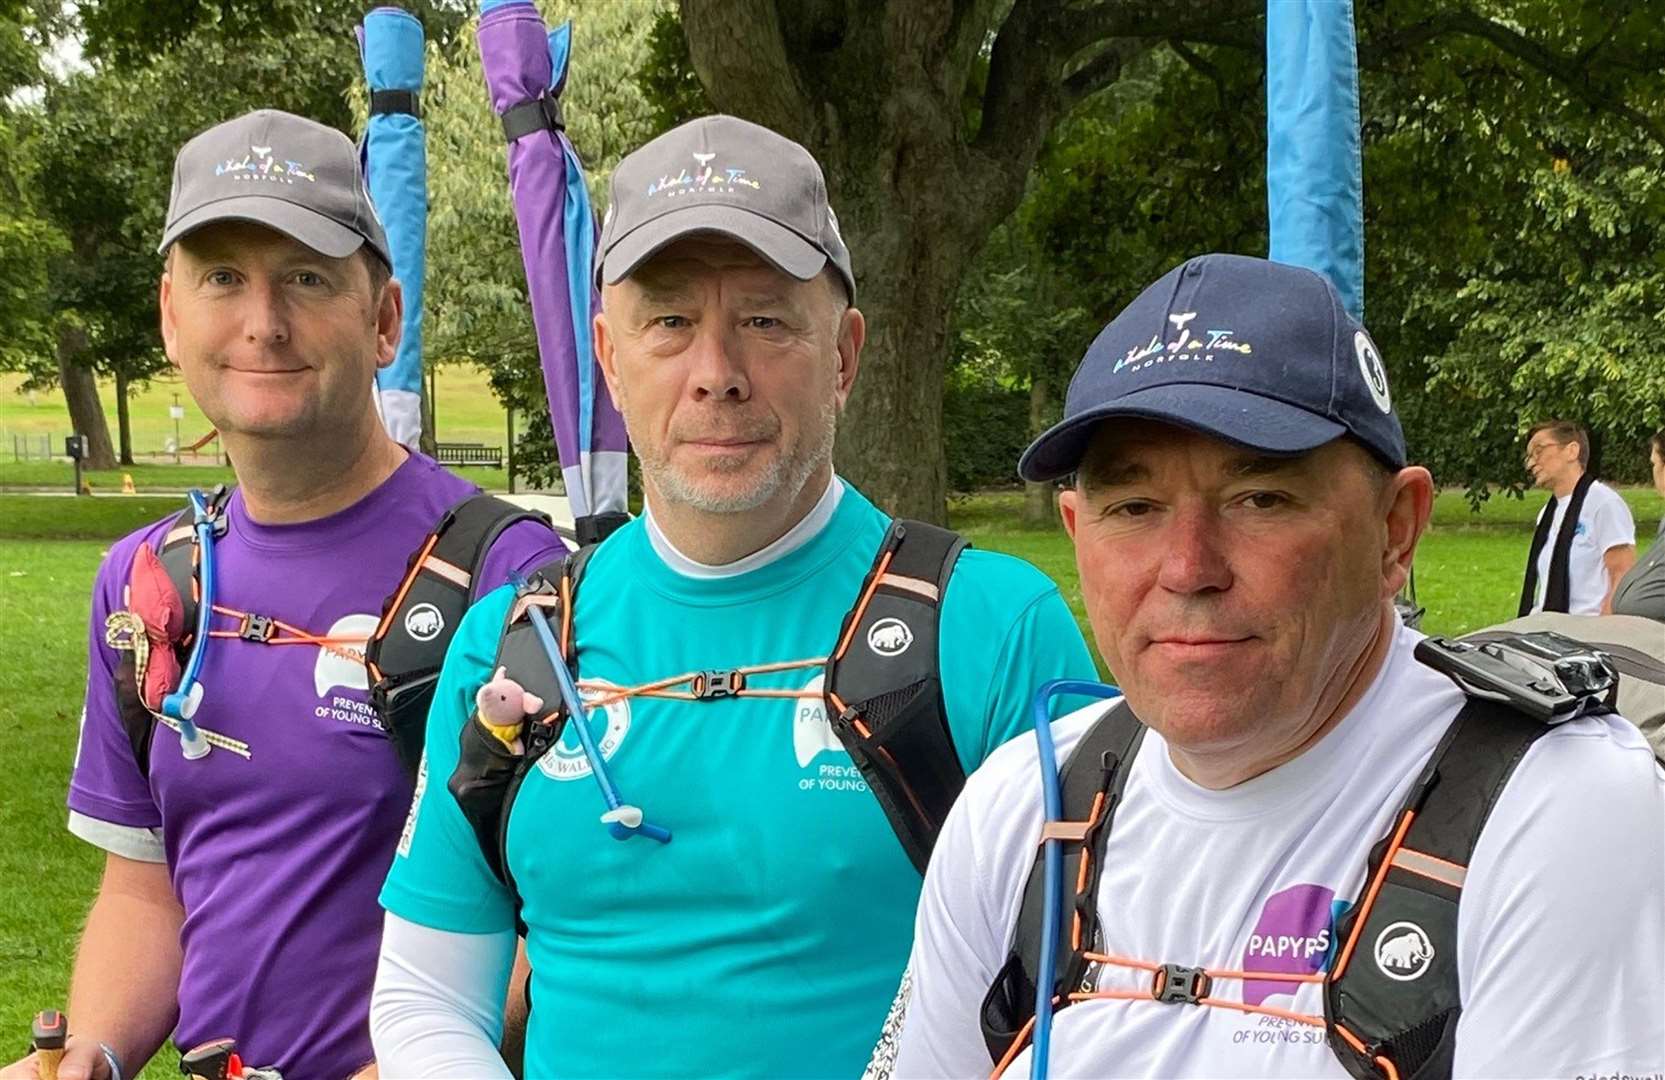 From left: Tim Owen, Mike Palmer and Andy Airey are also honoured at the Pride of Britain Awards for their month-long walking challenge to raise awareness about suicide (Papyrus/PA)